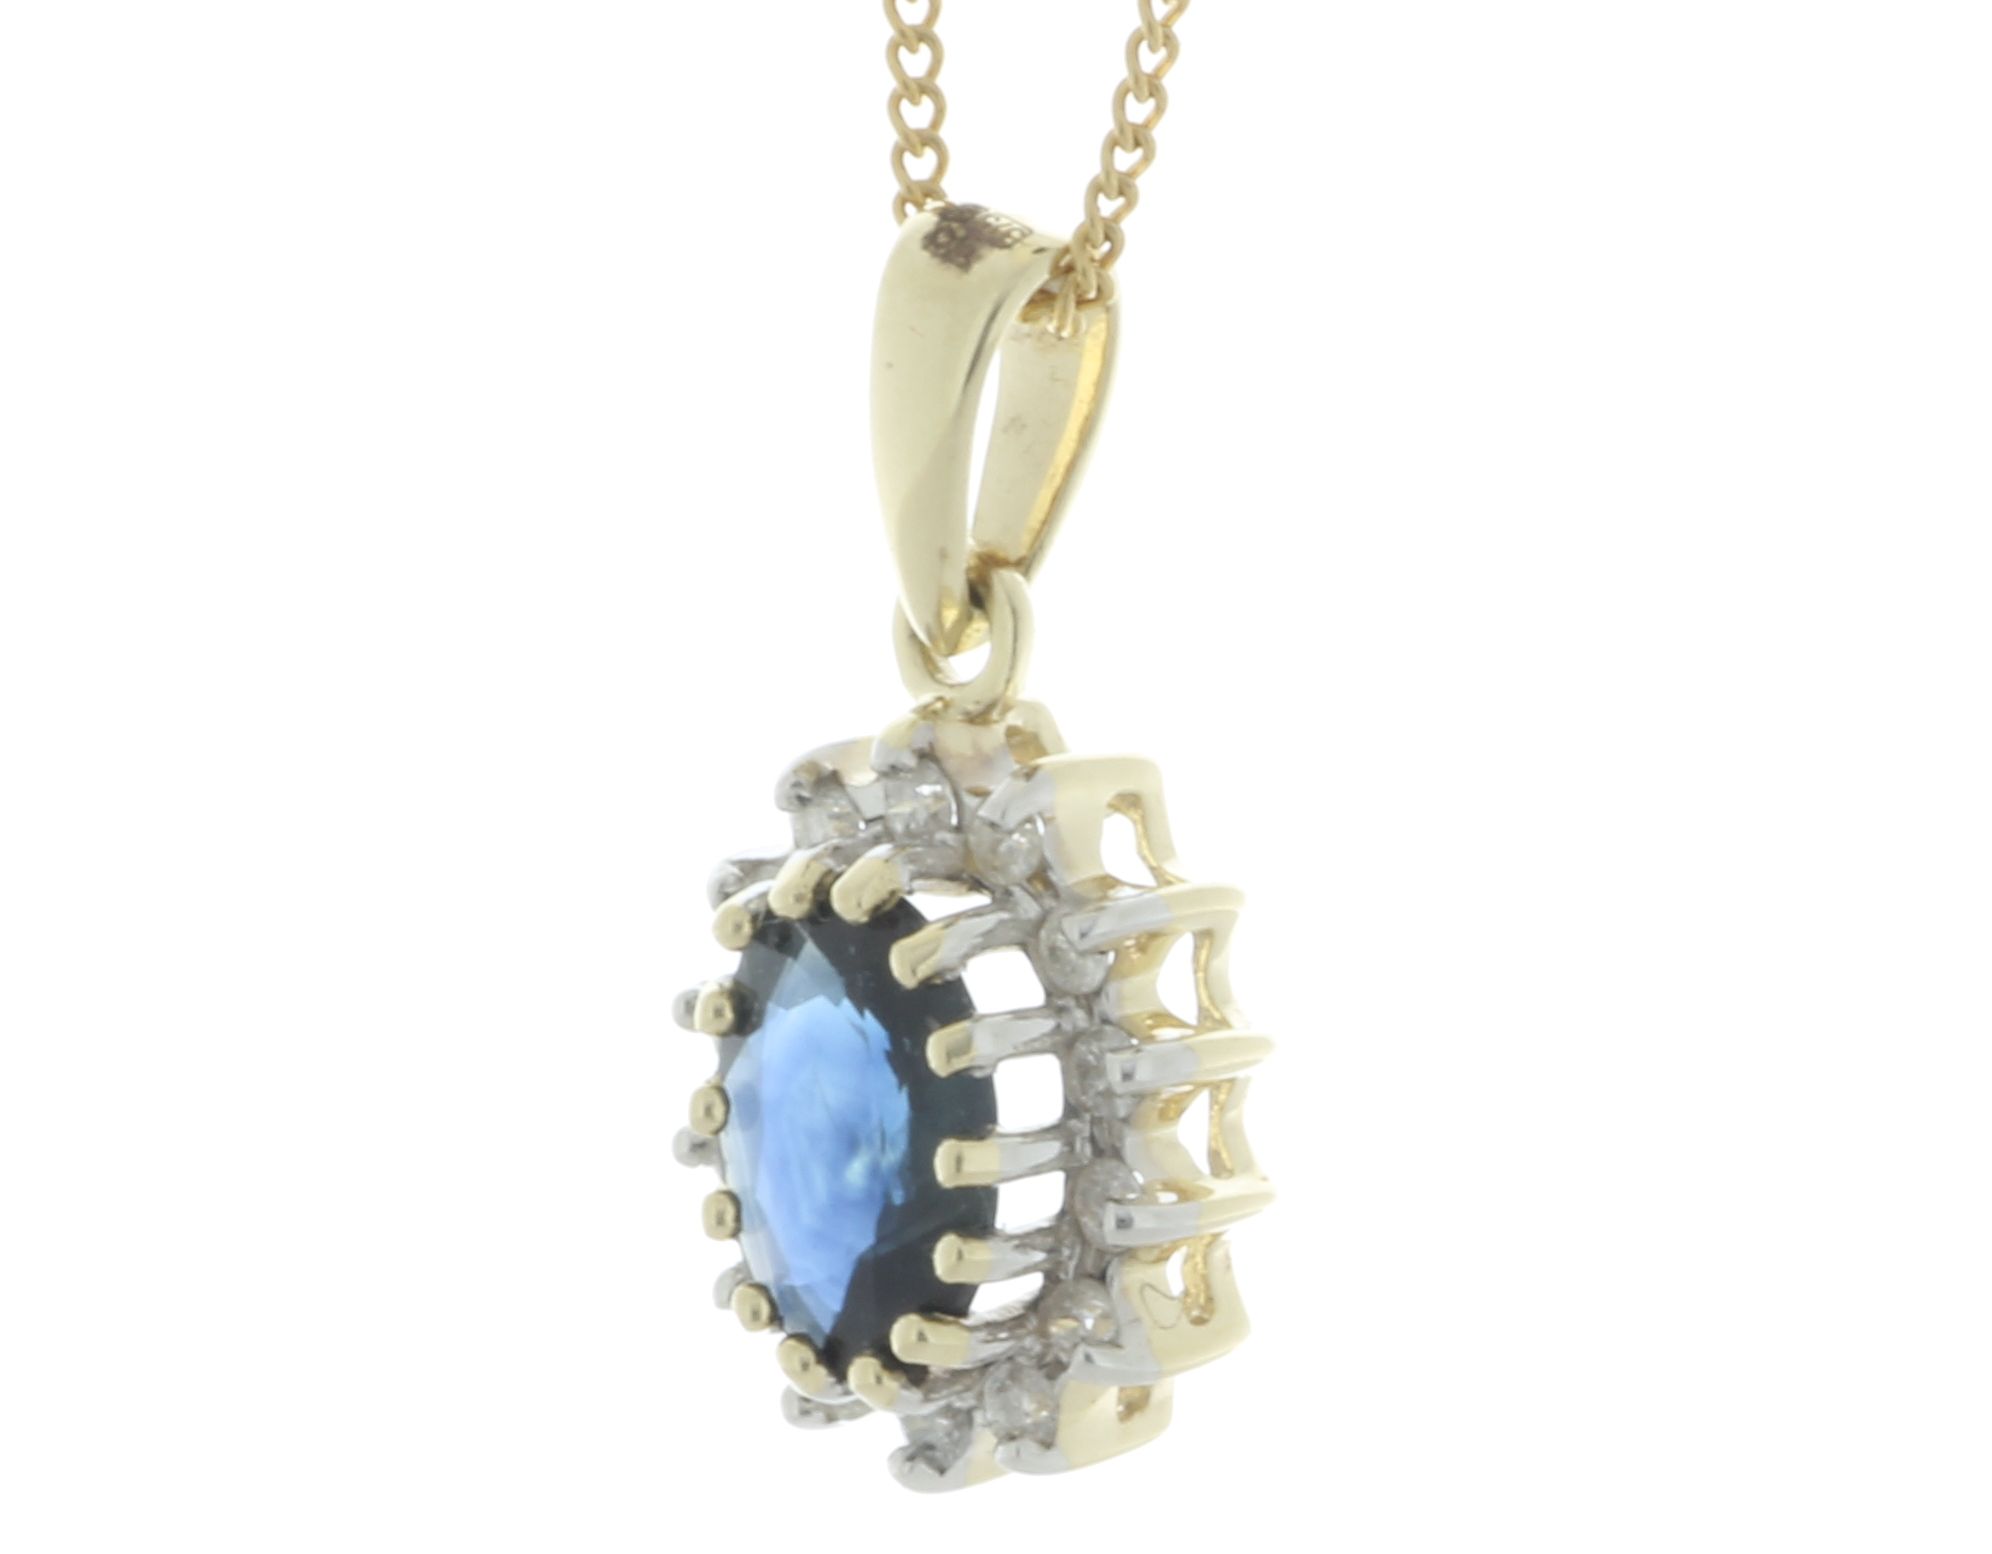 9ct Yellow Gold Diamond And Sapphire Pendant (S1.00) 0.14 Carats - Image 2 of 3